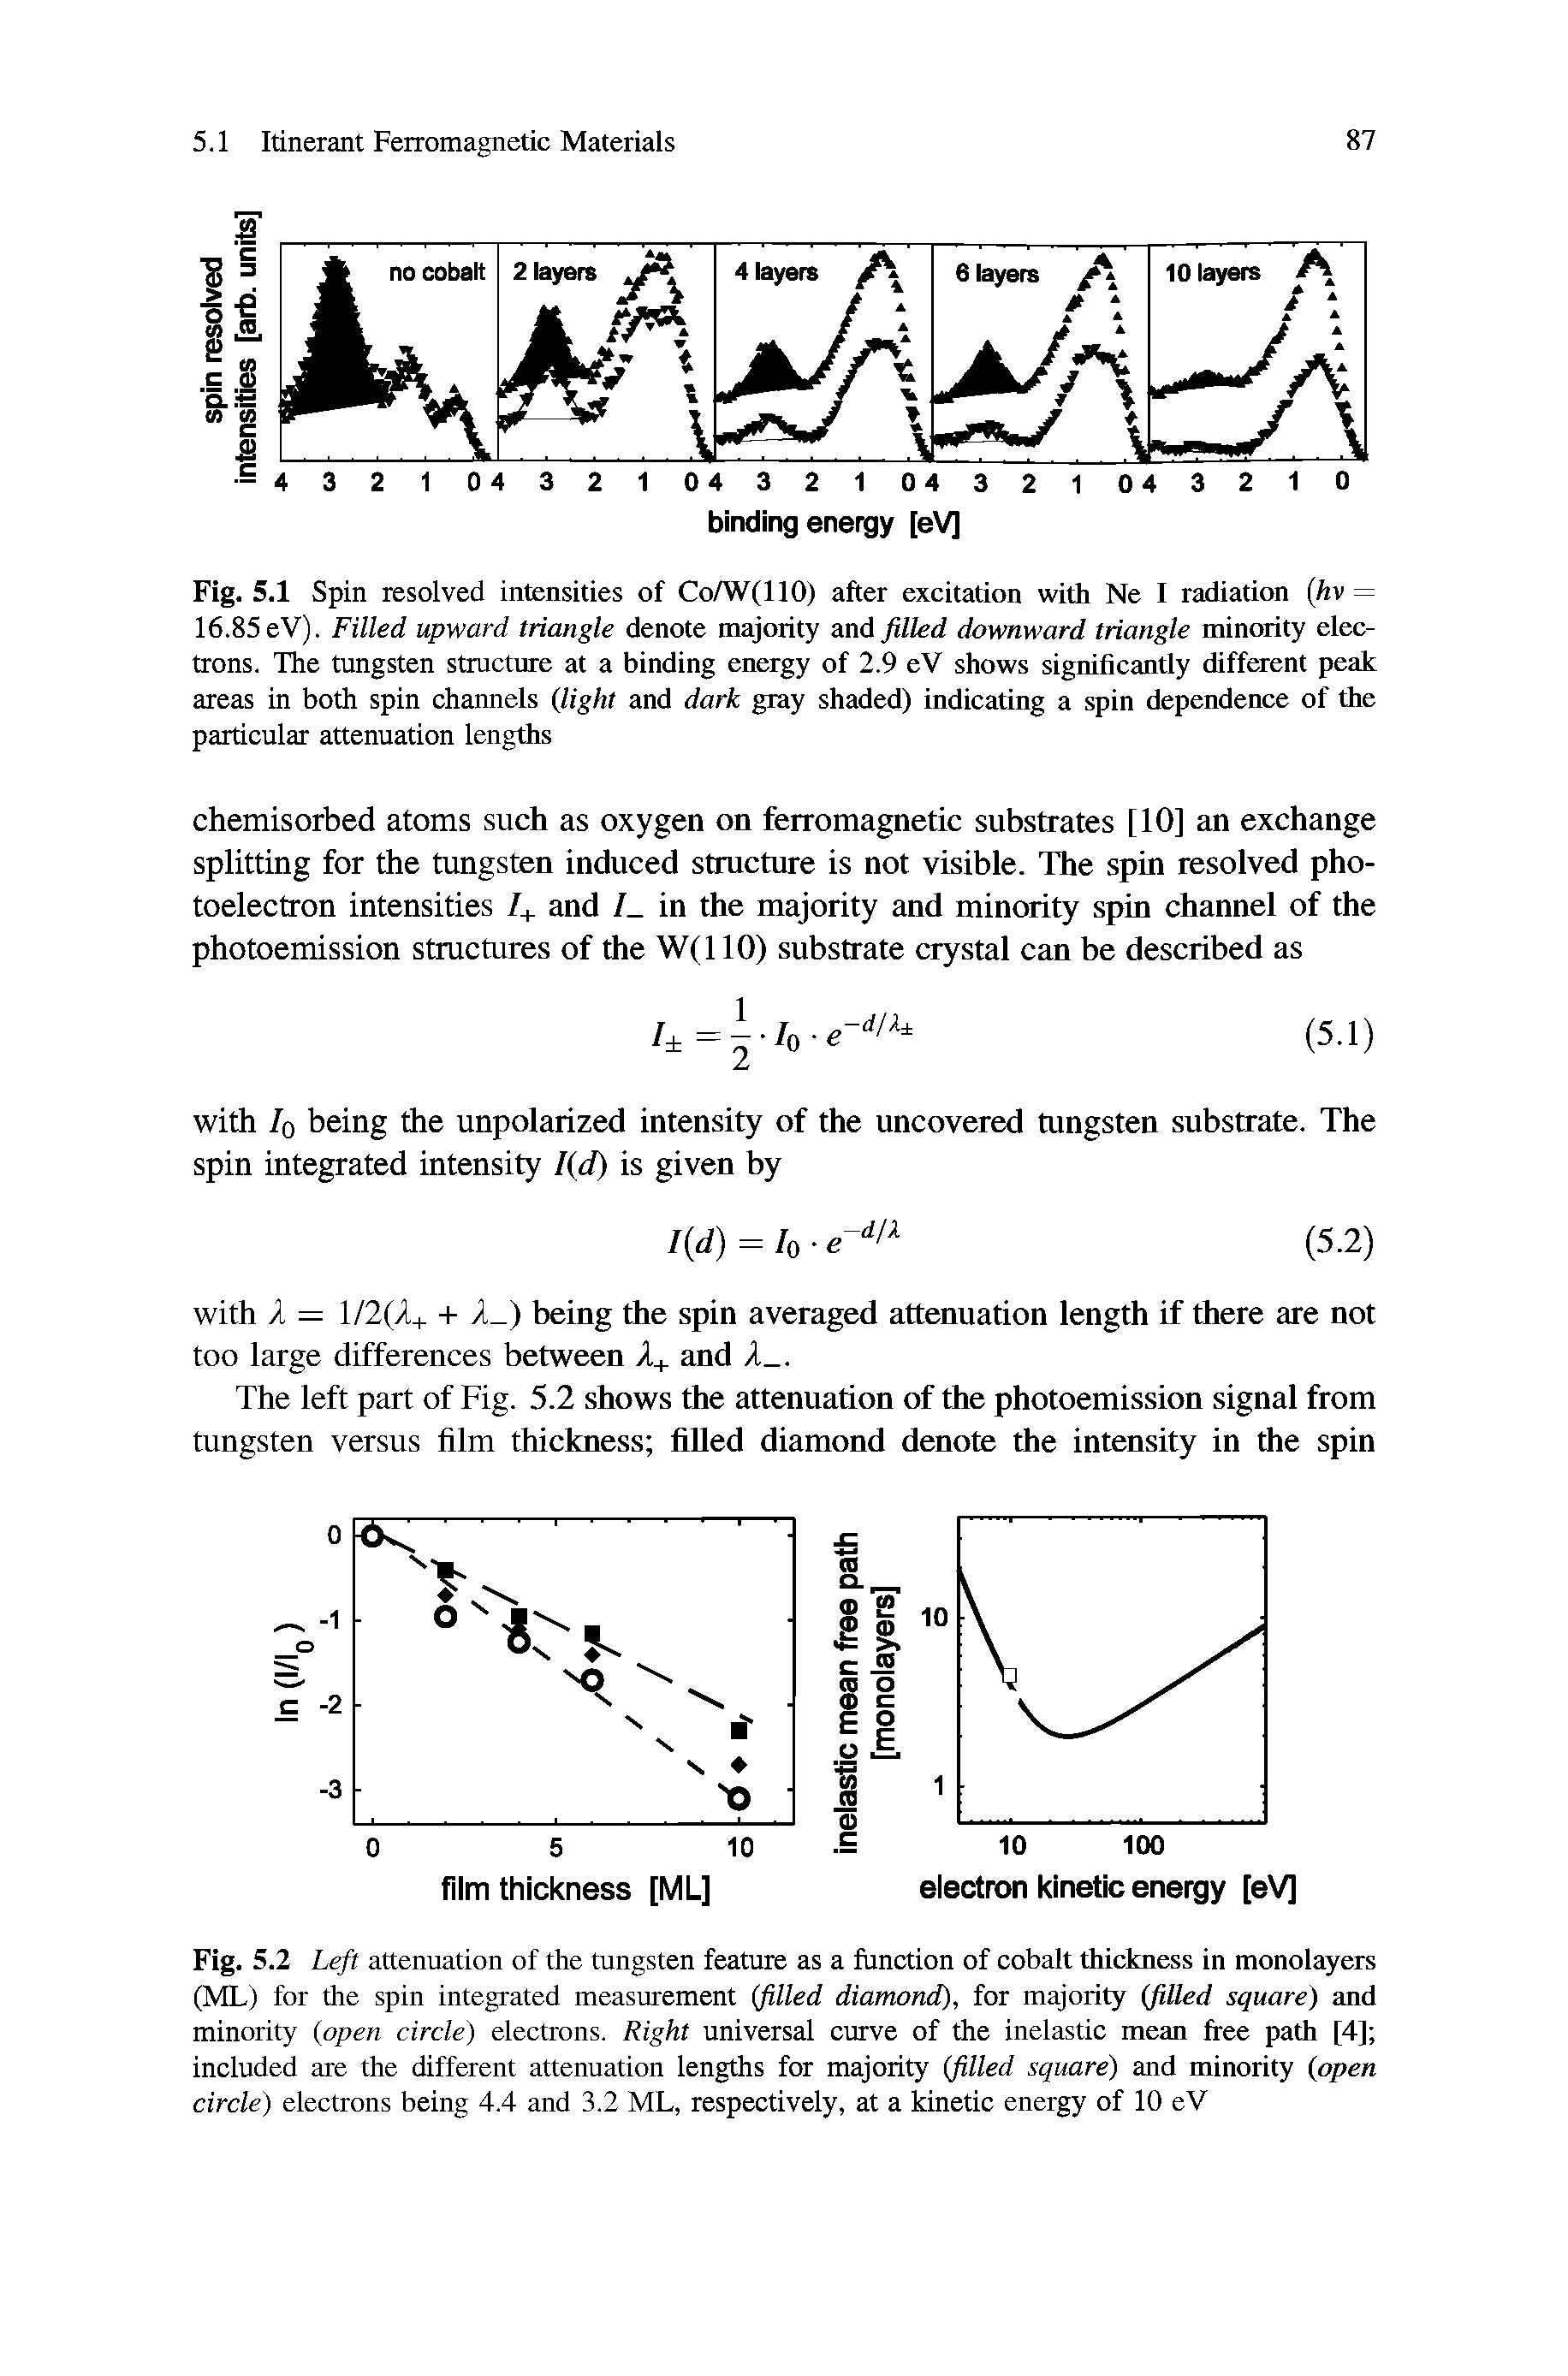 Fig. 5.2 Left attenuation of the tungsten feature as a function of cobalt thickness in monolayers (ML) for the spin integrated measurement (filled dianwnd), for majority (filled square) and minority (open circle) electrons. Right universal curve of the inelastic mean firee path [4] included are the different attenuation lengths for majority (filled square) and minority (open circle) electrons being 4.4 and 3.2 ML, respectively, at a kinetic energy of 10 eV...